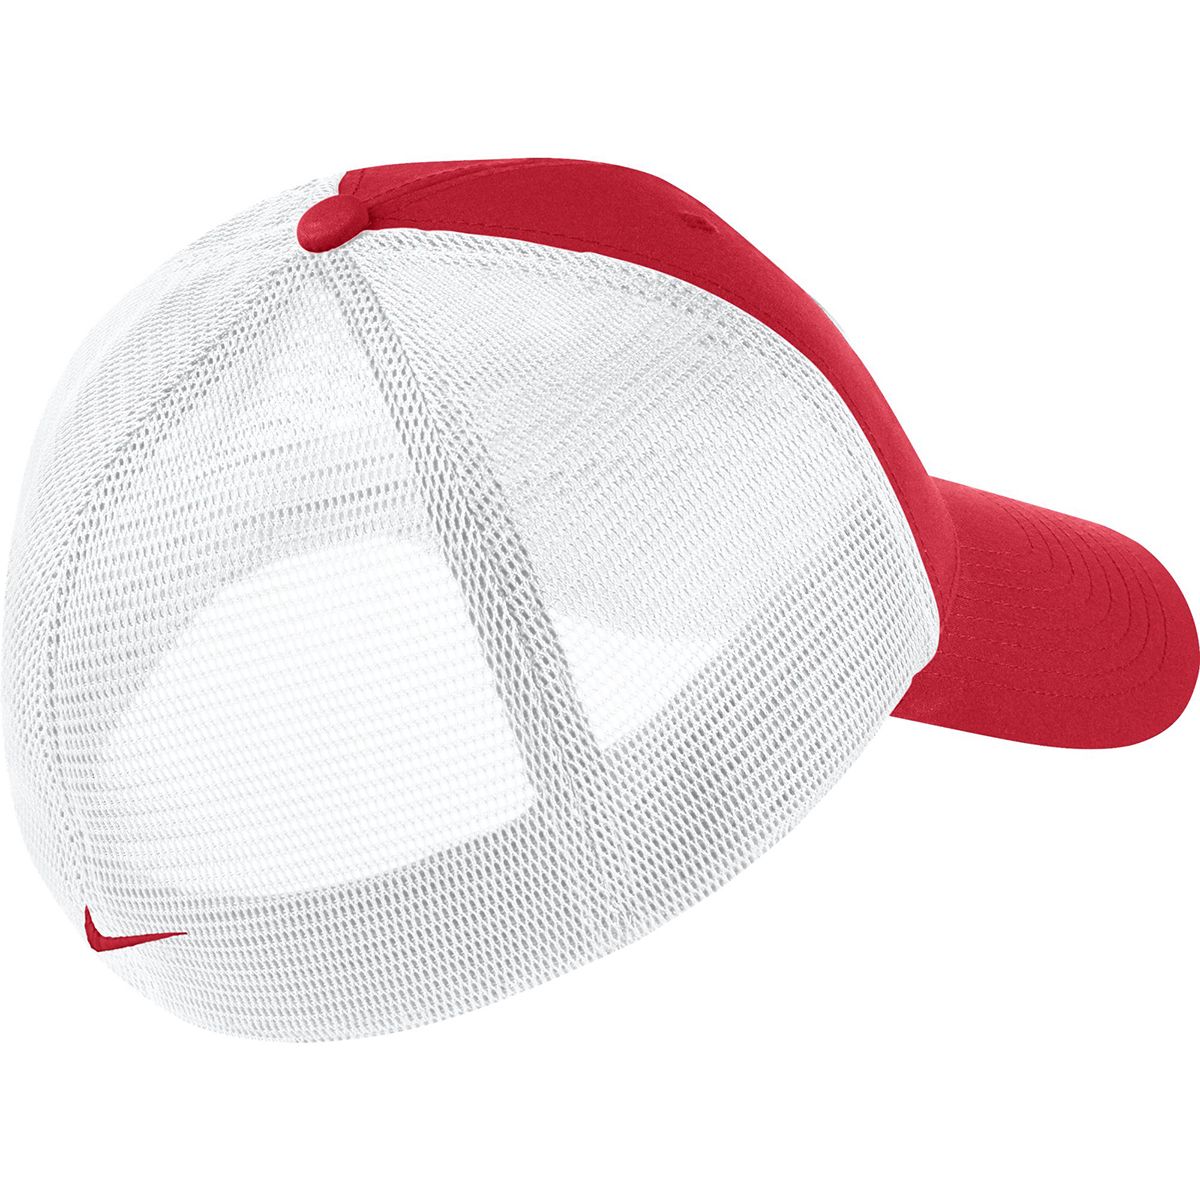 Nike Legacy 91 Mesh Fitted Hat | Discount Golf World